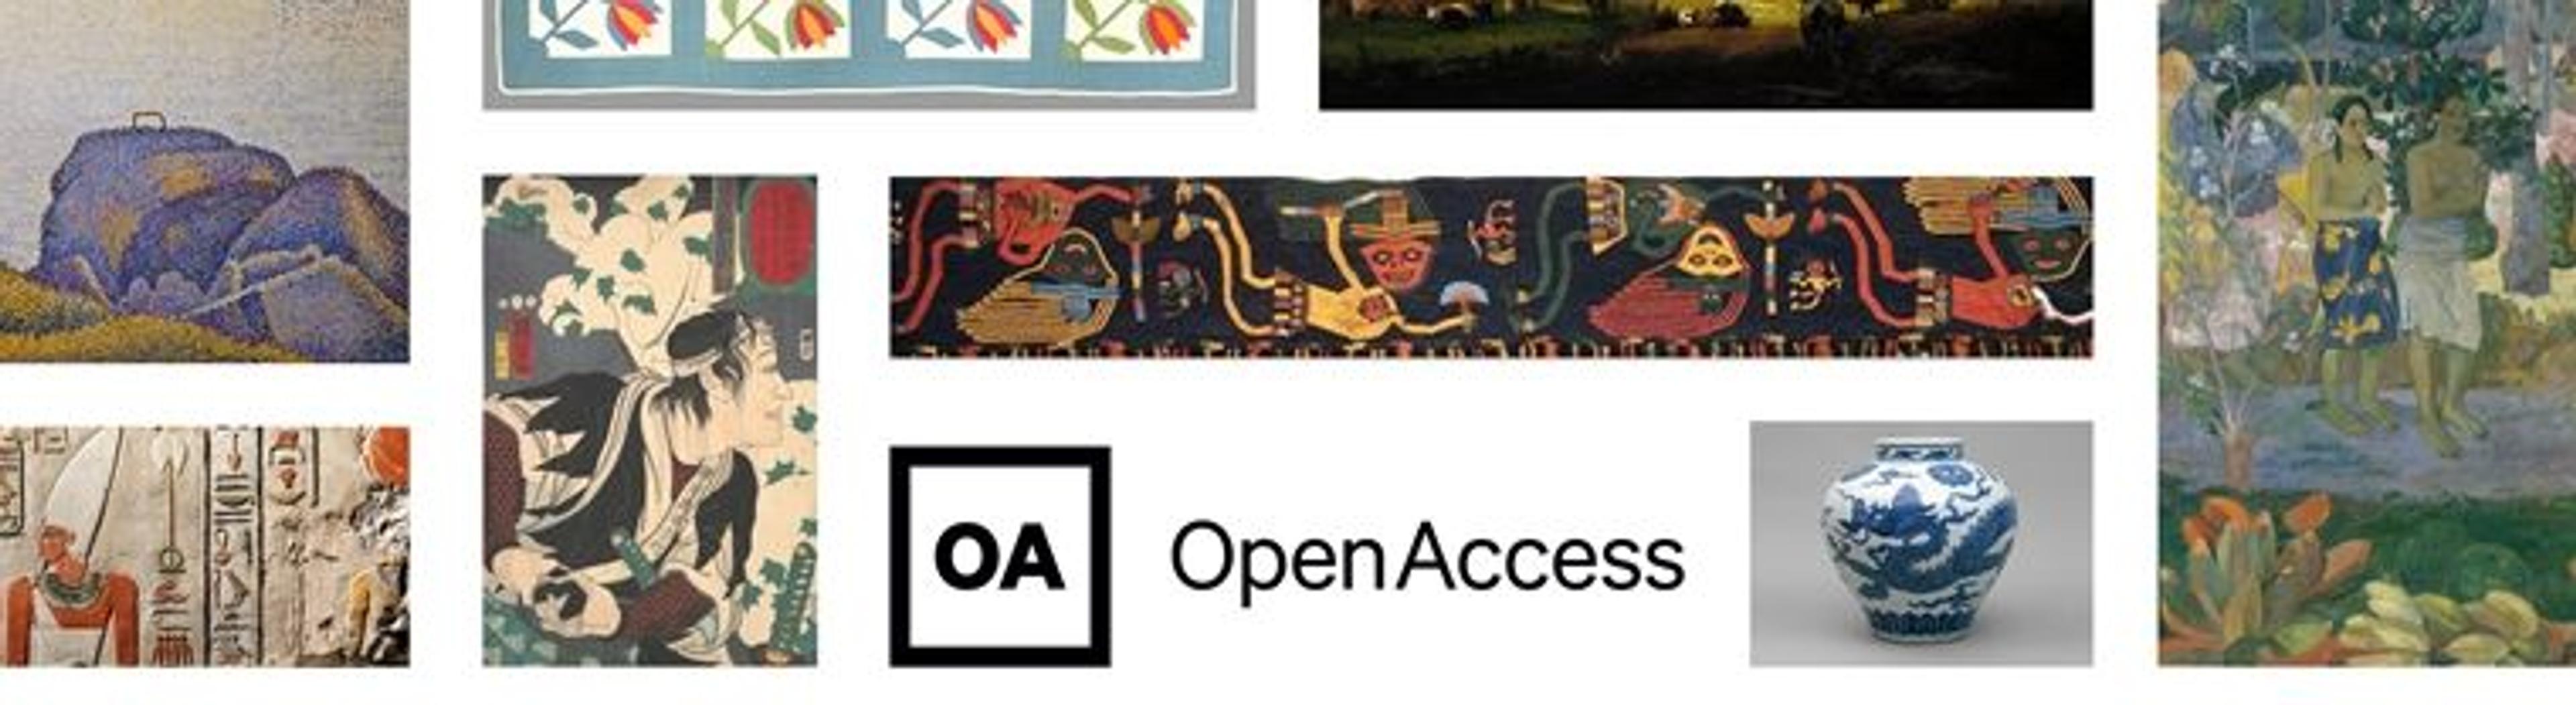 Open Access images in The Met collection